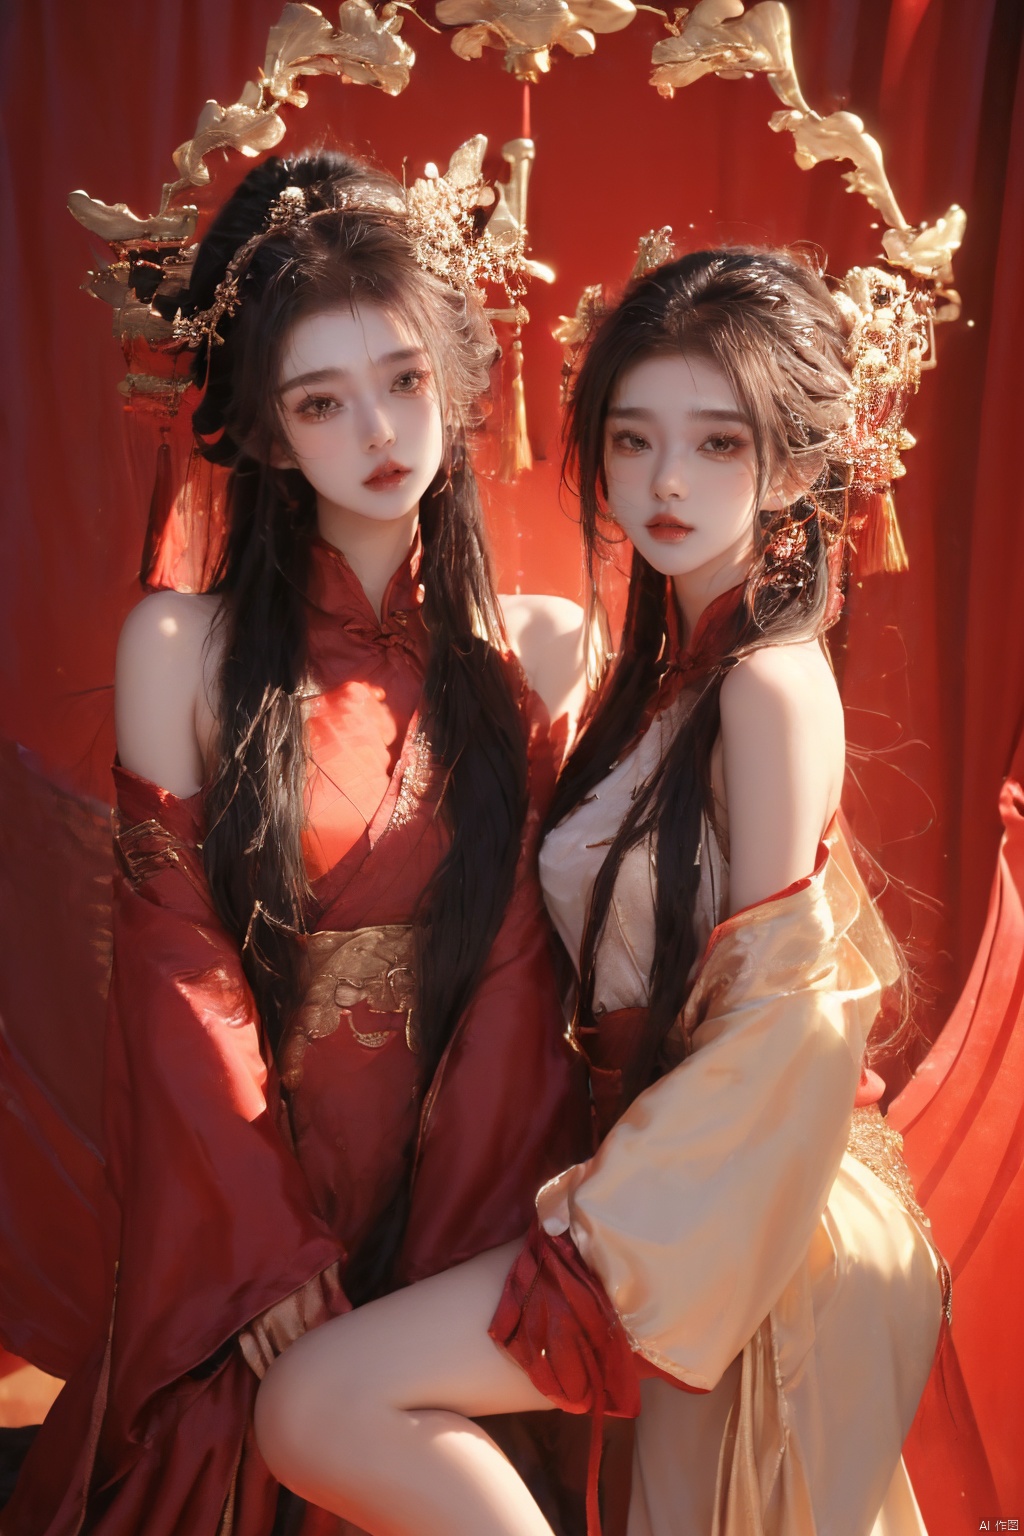 (2_girls::1.9), twins, huliya,Black 8D glossy stockings,long_hair, Bangs, Bangs between eyes, jewelry, gold jewelry, hanfu, looking to the side, bare_foot, Bare legs, On your own legs, bare shoulders, Whole body, sitting, chair, Sit on the chair, Chinese furniture, chinese chair, Indoor